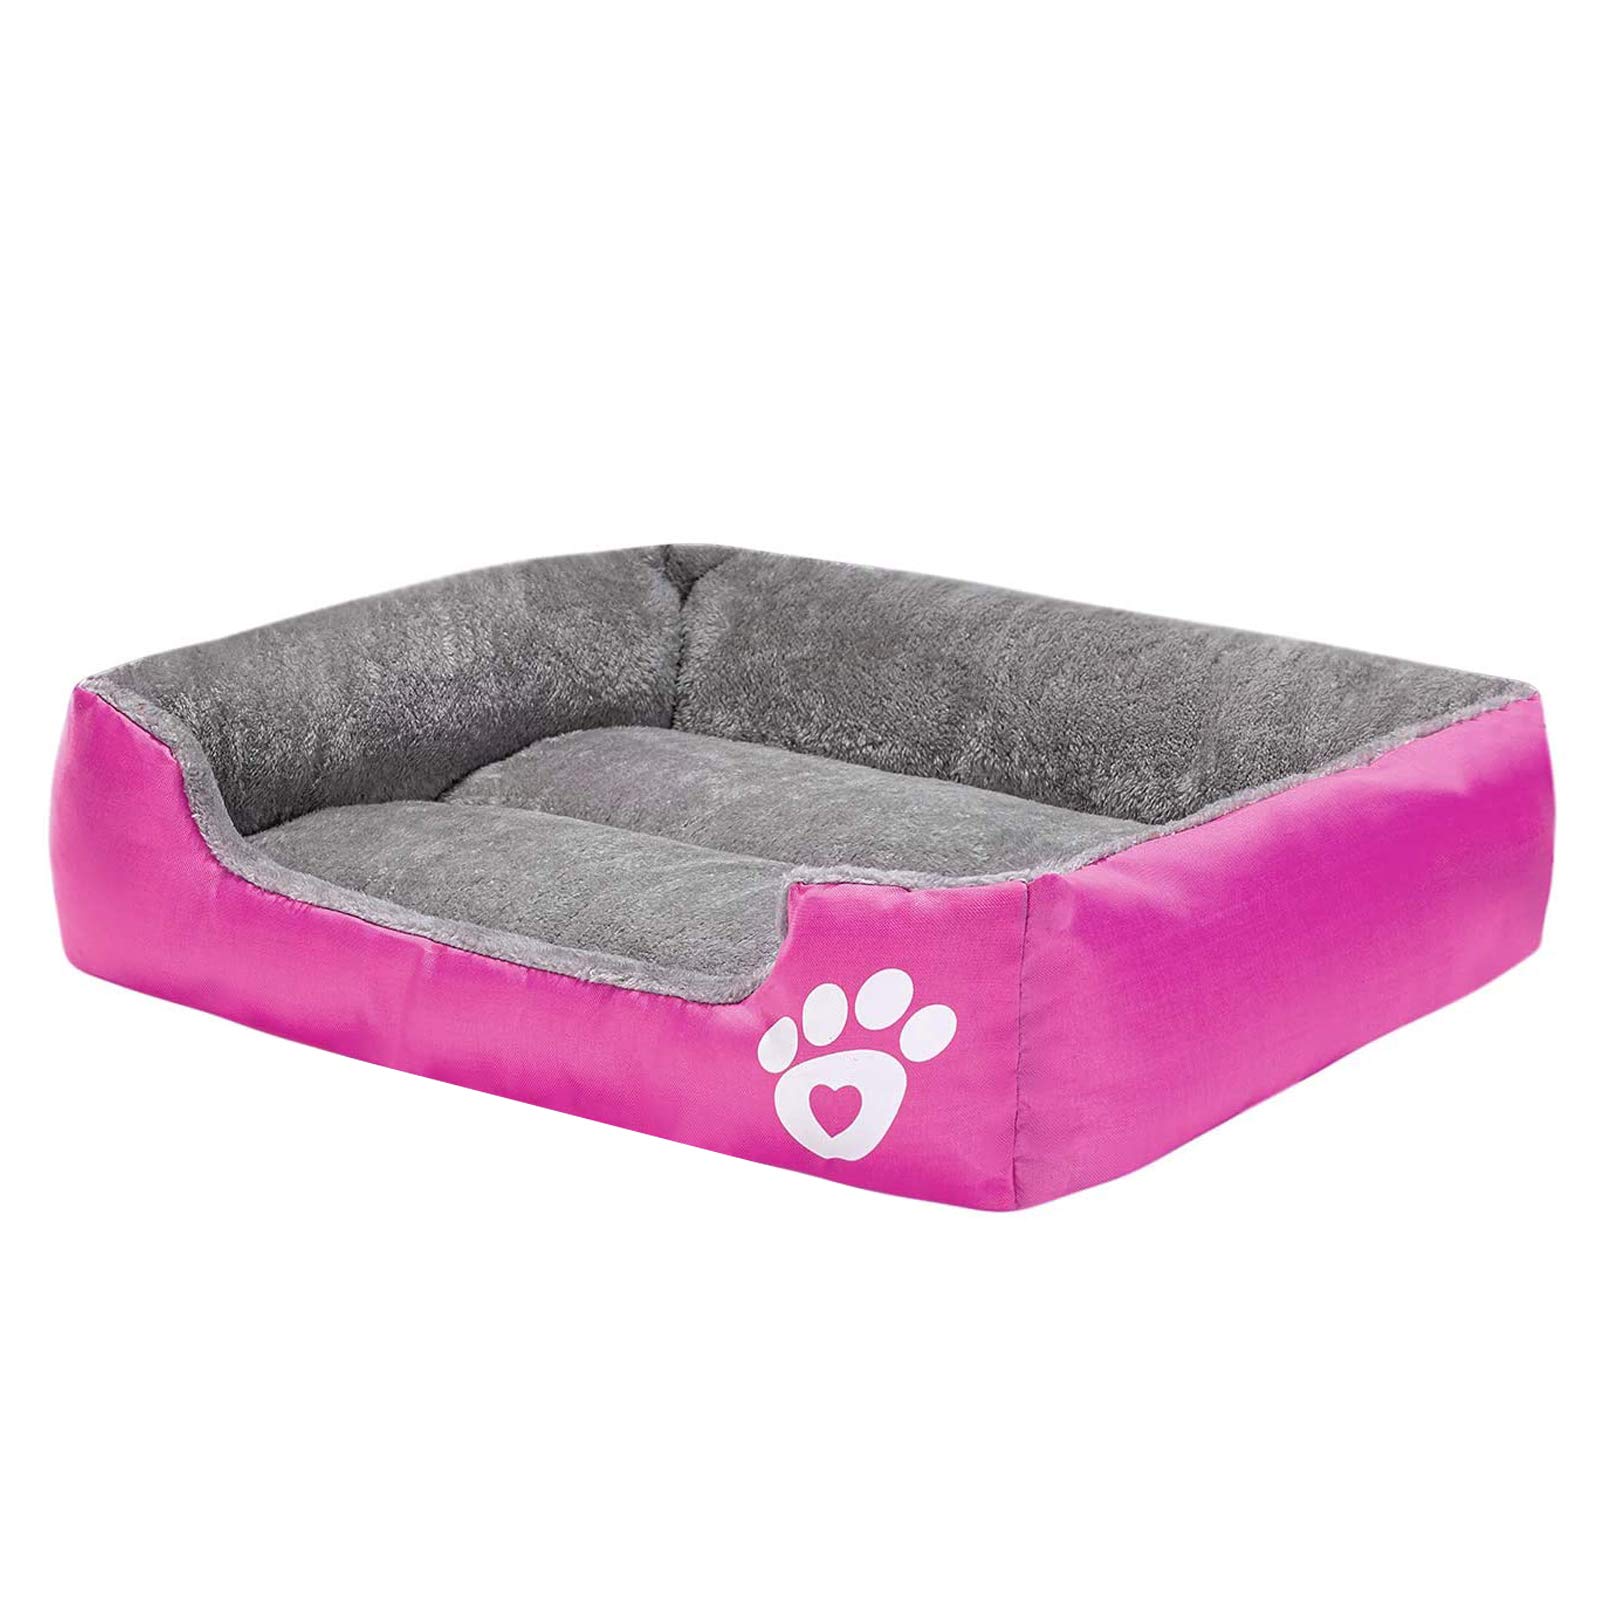 n-a RYGO Dog beds for Small/Medium/Big/Extra Large Dogs, Super Soft Pet Sofa Cats Bed，Self Warming and Breathable Pet Bed Premium Bedding